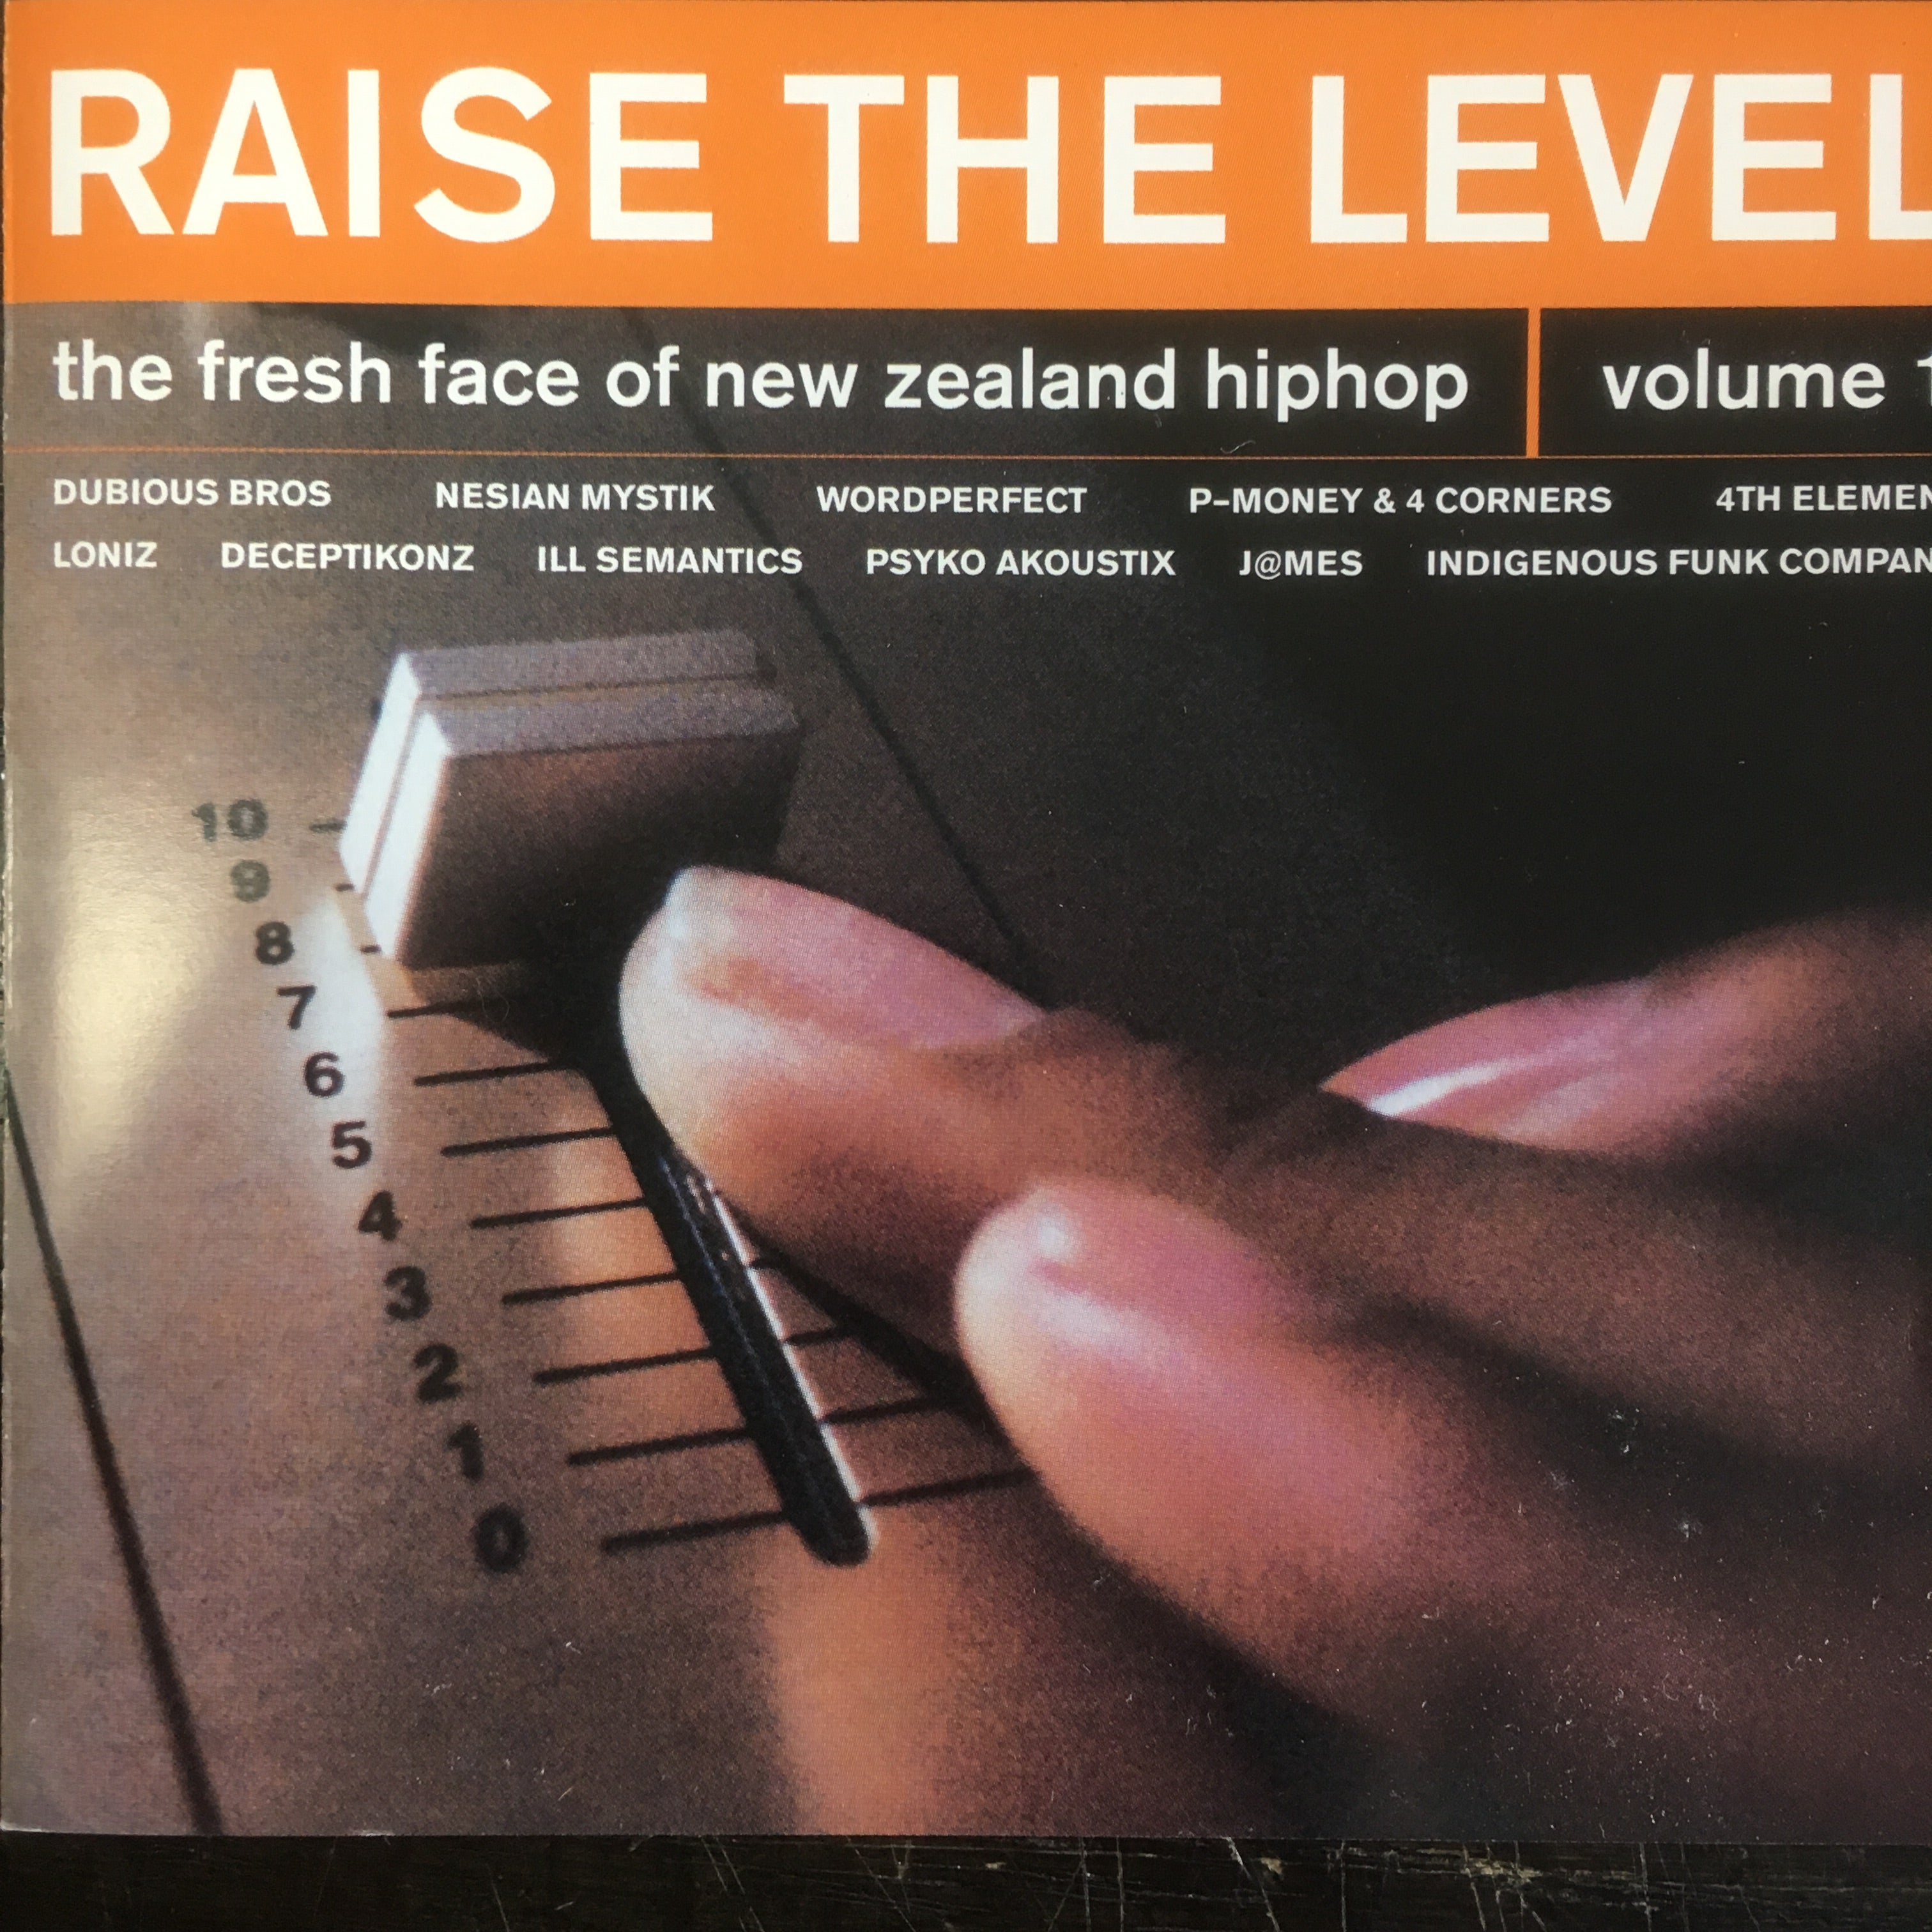 RELICS　OF　HIPHOP　RAISE　THE　VOLUME　ZEALAND　LEVEL　THE　NEW　FRESH　FACE　1-VARIOUS